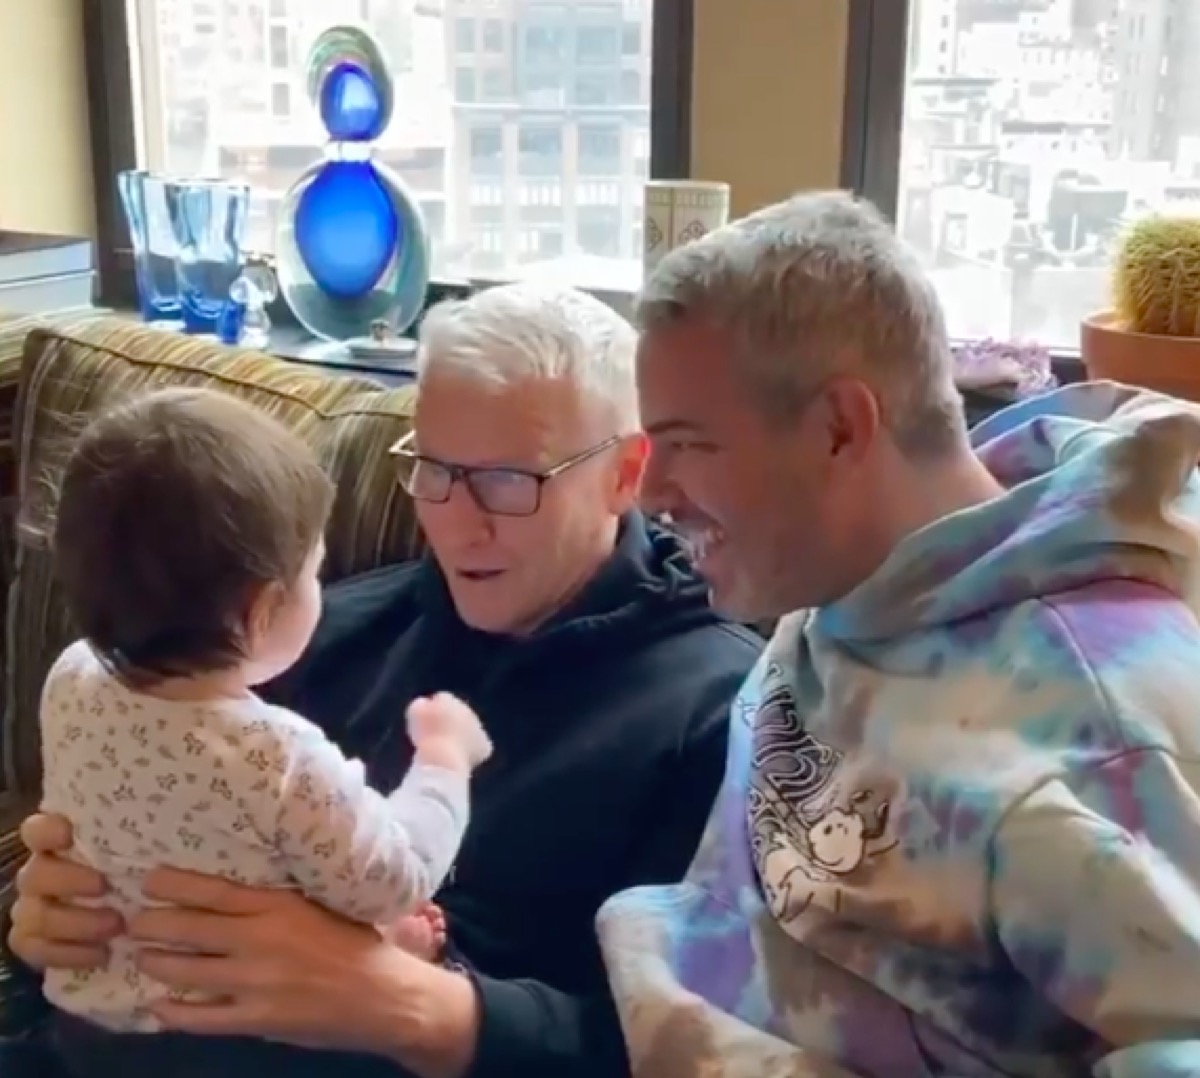 Anderson Cooper and Andy Cohen with baby Benjamin Cohen